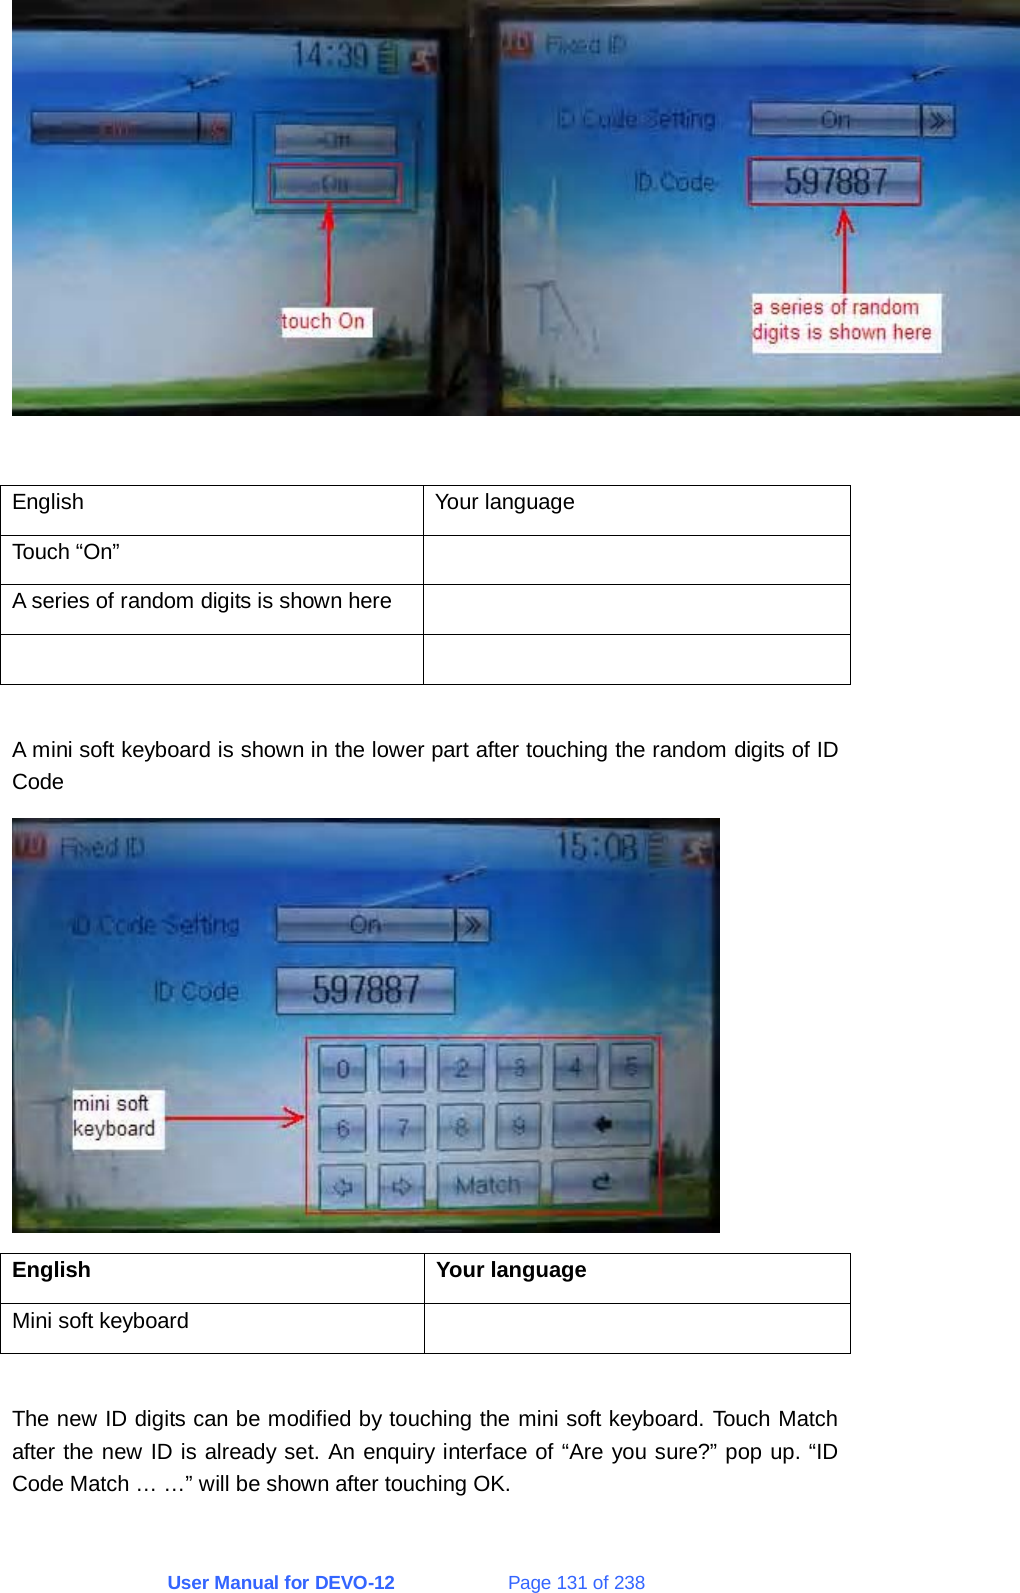 User Manual for DEVO-12             Page 131 of 238   English Your language Touch “On”   A series of random digits is shown here      A mini soft keyboard is shown in the lower part after touching the random digits of ID Code  English Your language Mini soft keyboard    The new ID digits can be modified by touching the mini soft keyboard. Touch Match after the new ID is already set. An enquiry interface of “Are you sure?” pop up. “ID Code Match … …” will be shown after touching OK. 